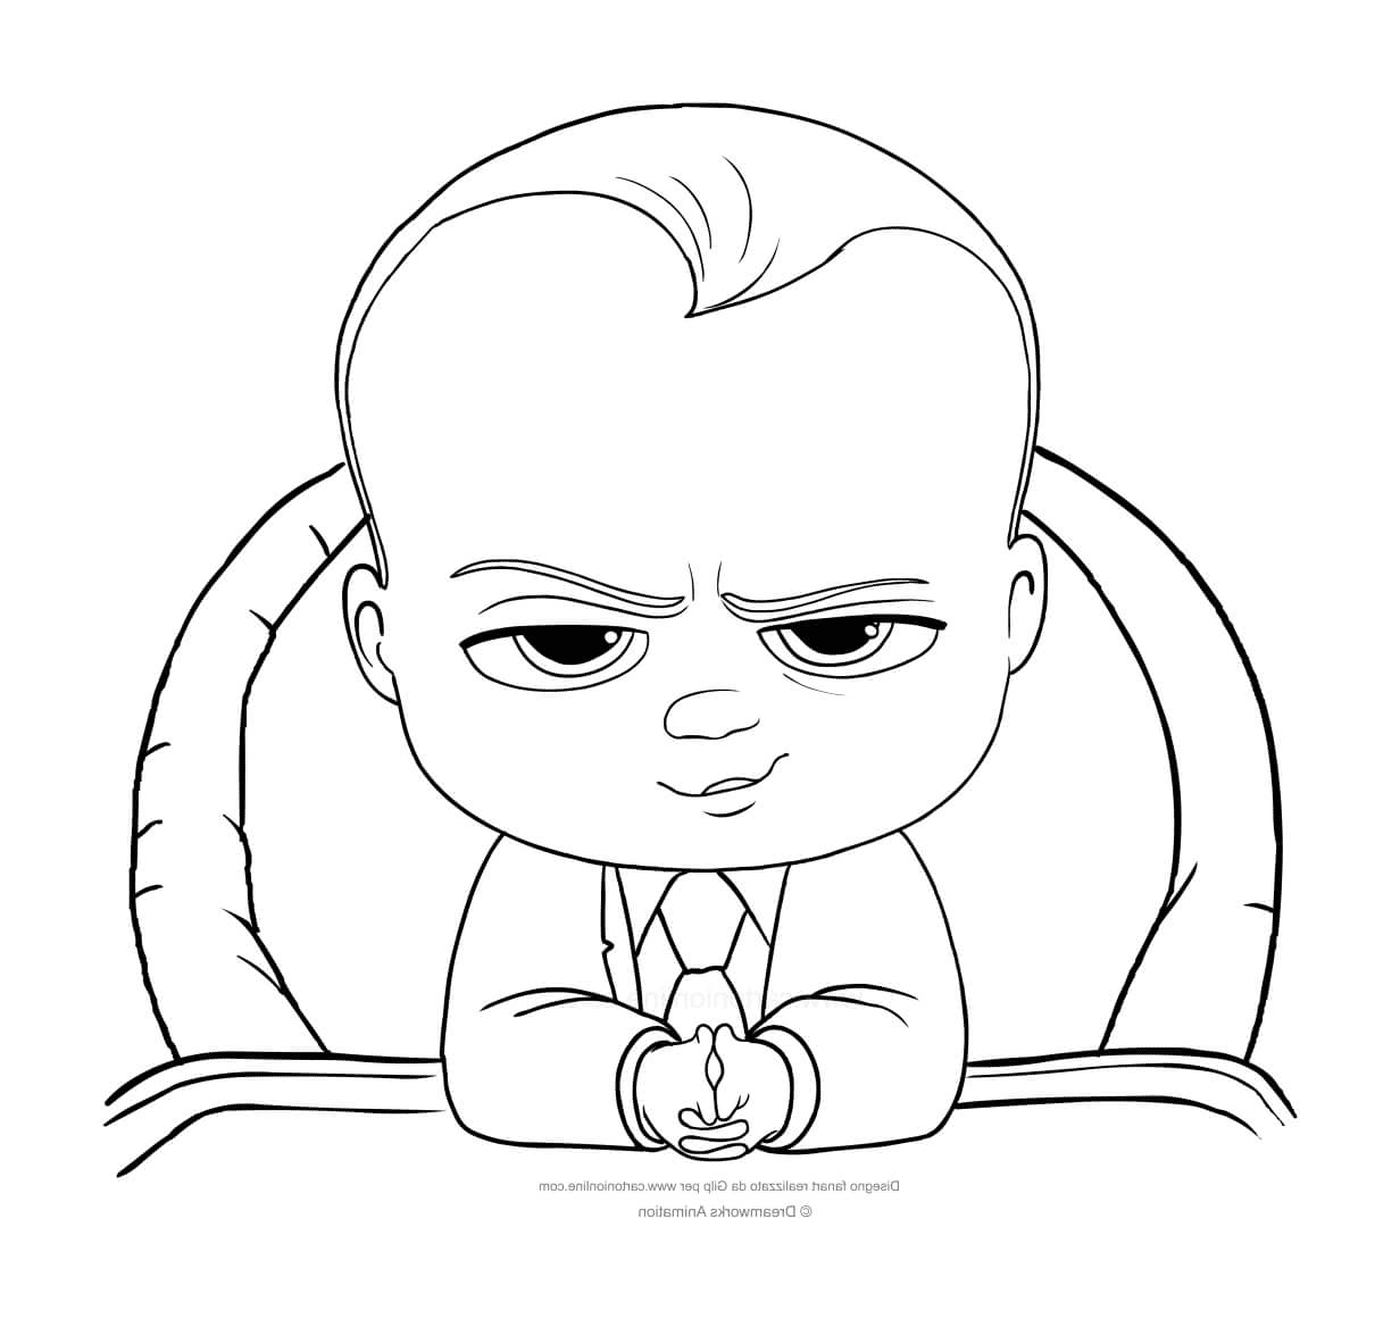 Baby Boss Coloring Pages: 22 Printable Drawings